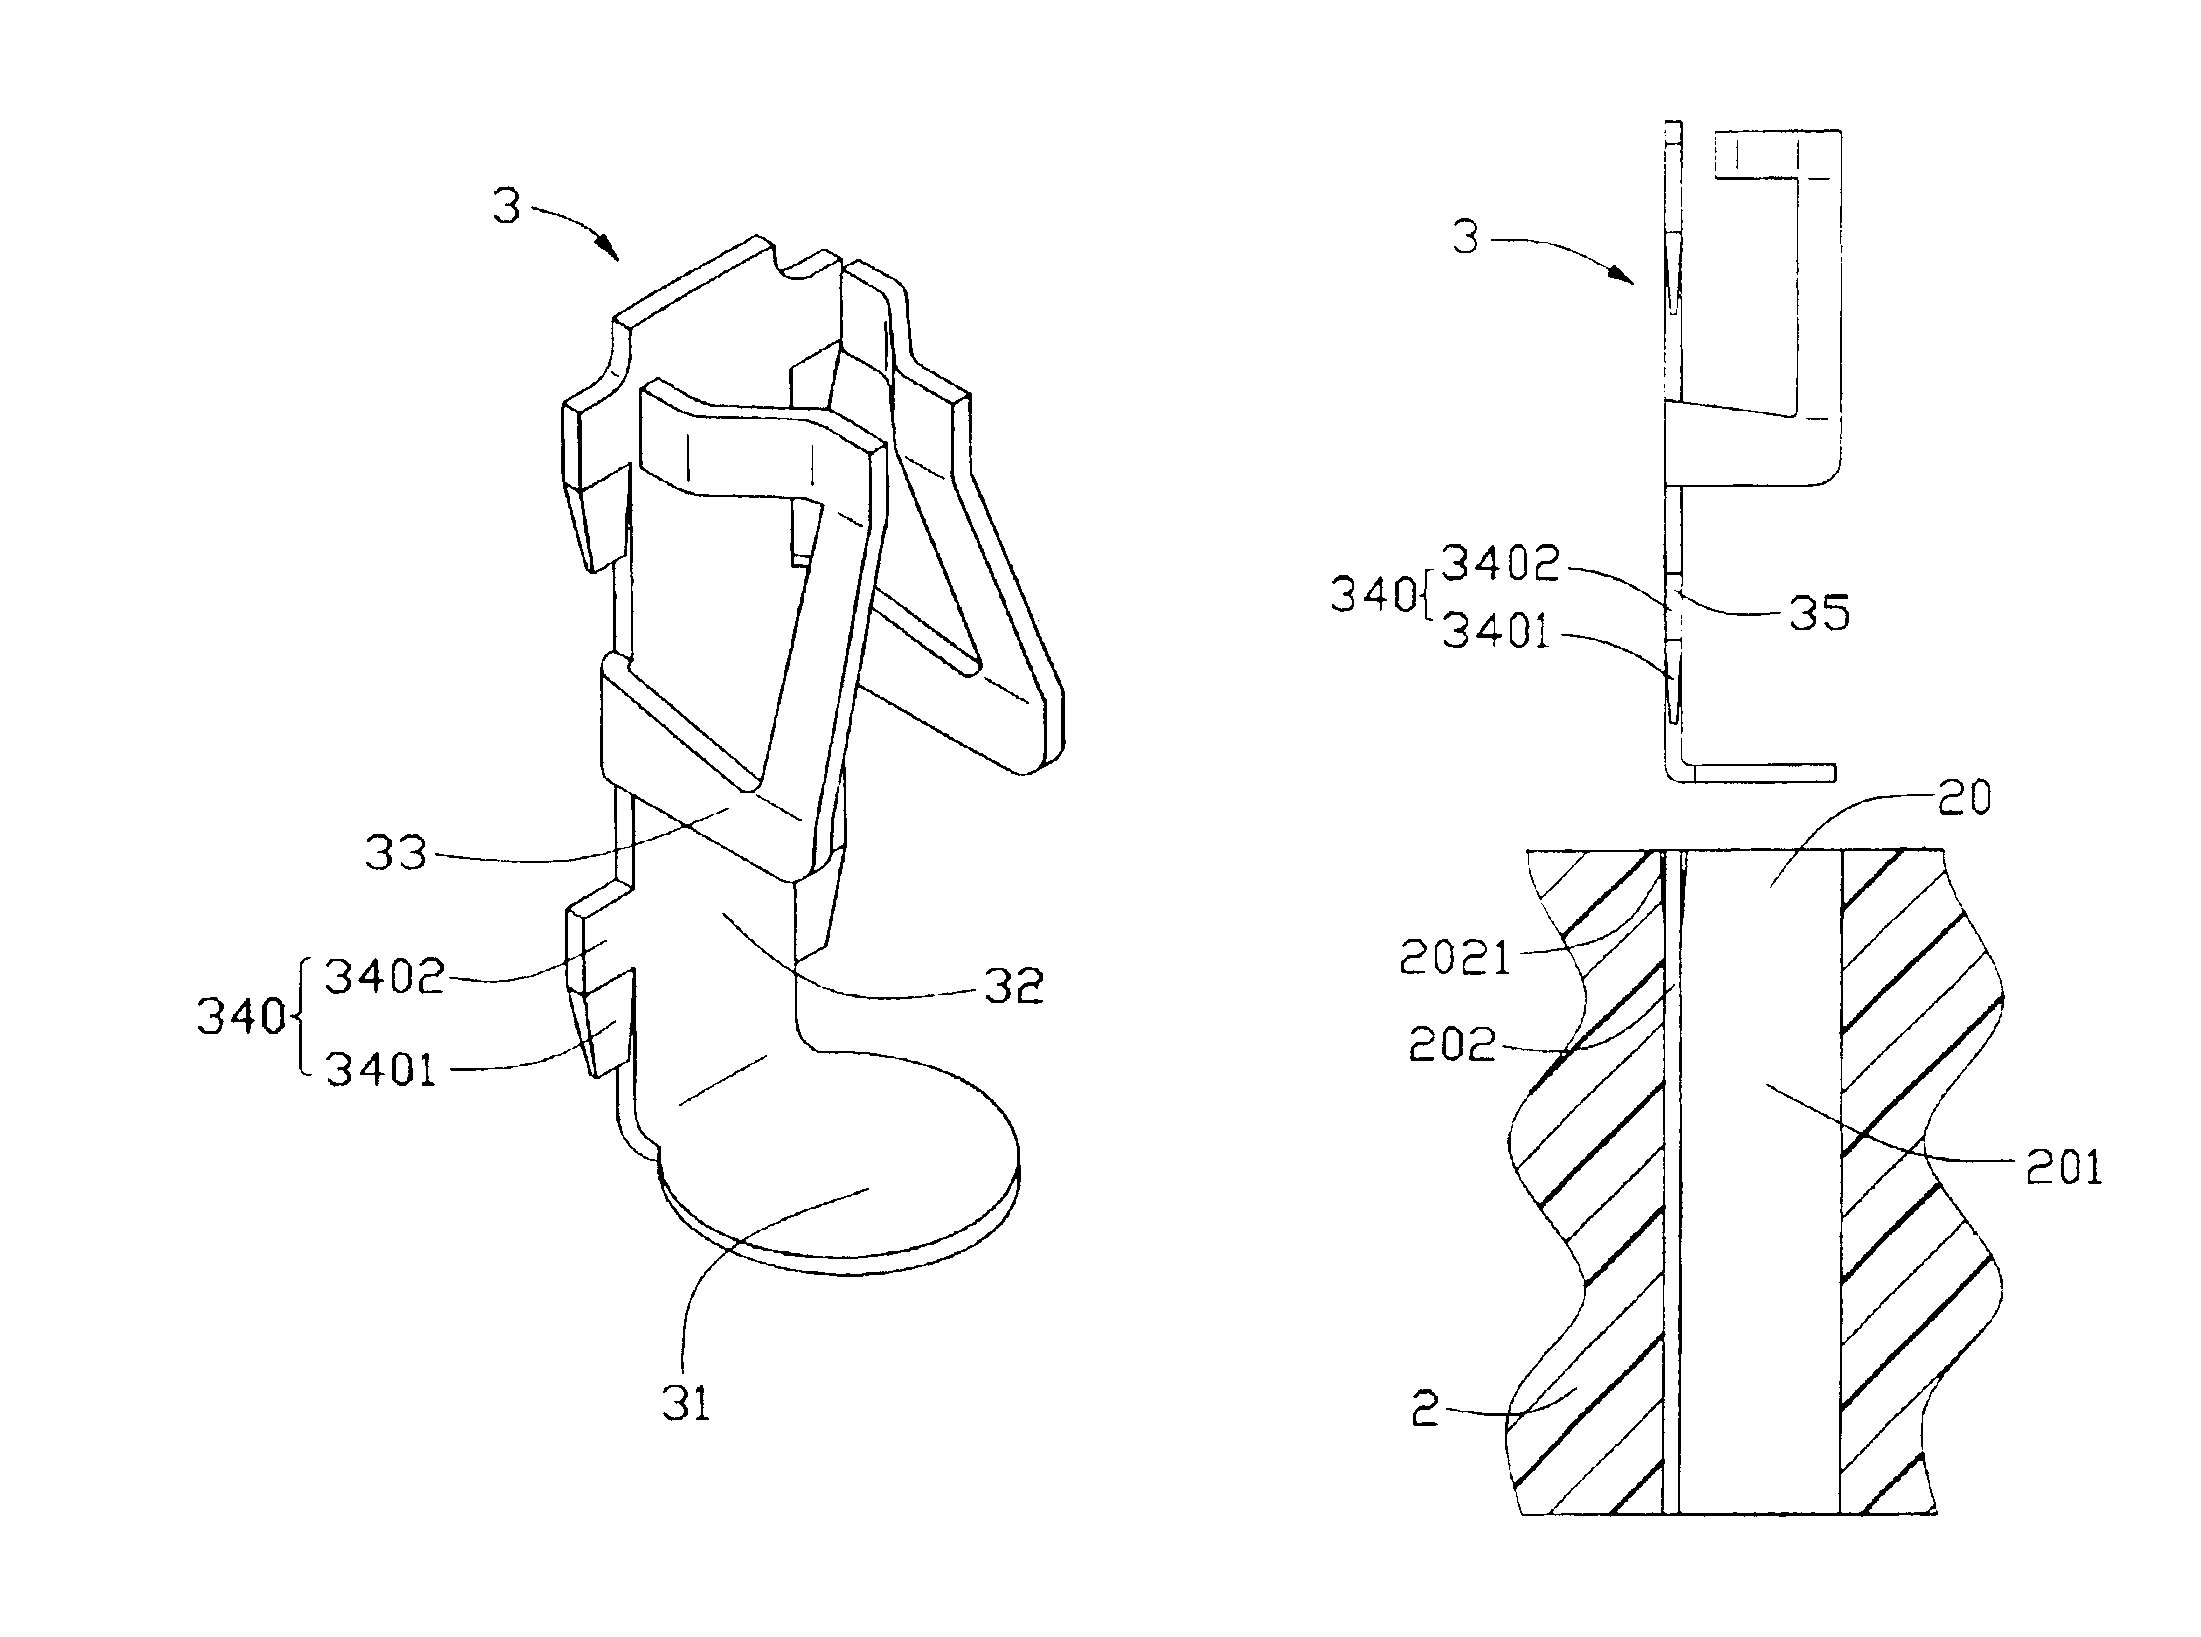 Electrical connector with accurately secured contacts